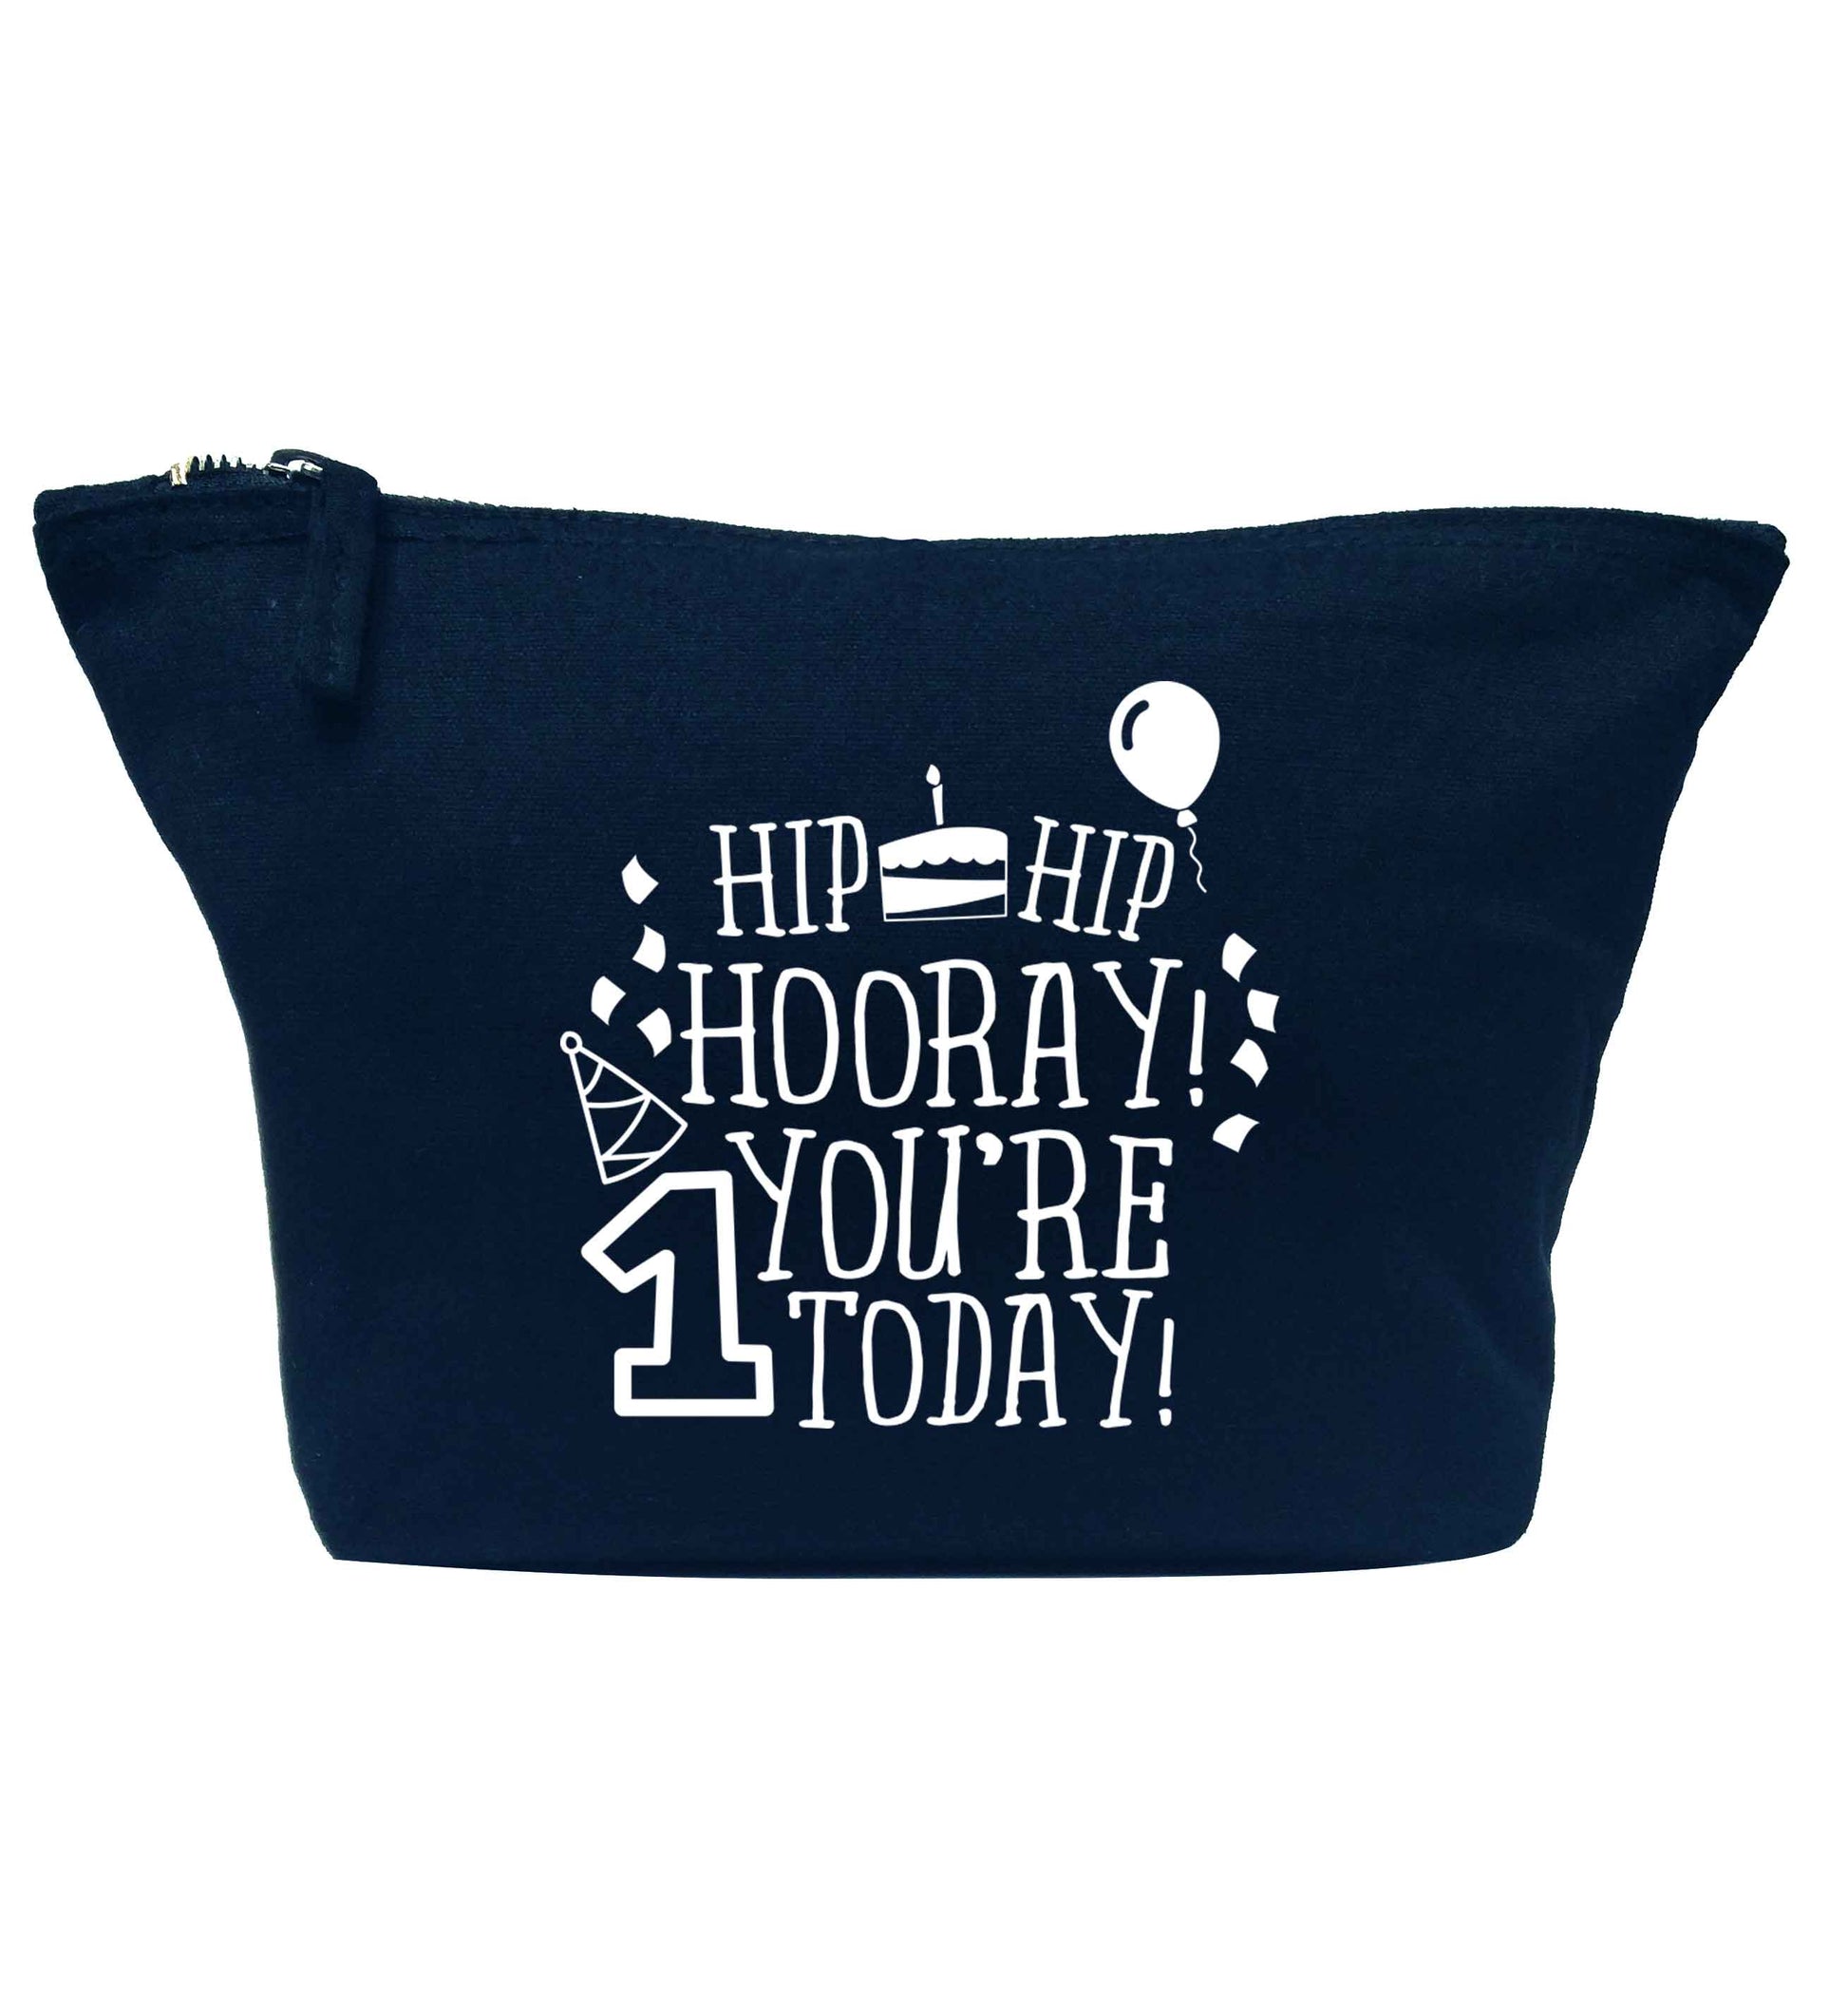 You're one today navy makeup bag